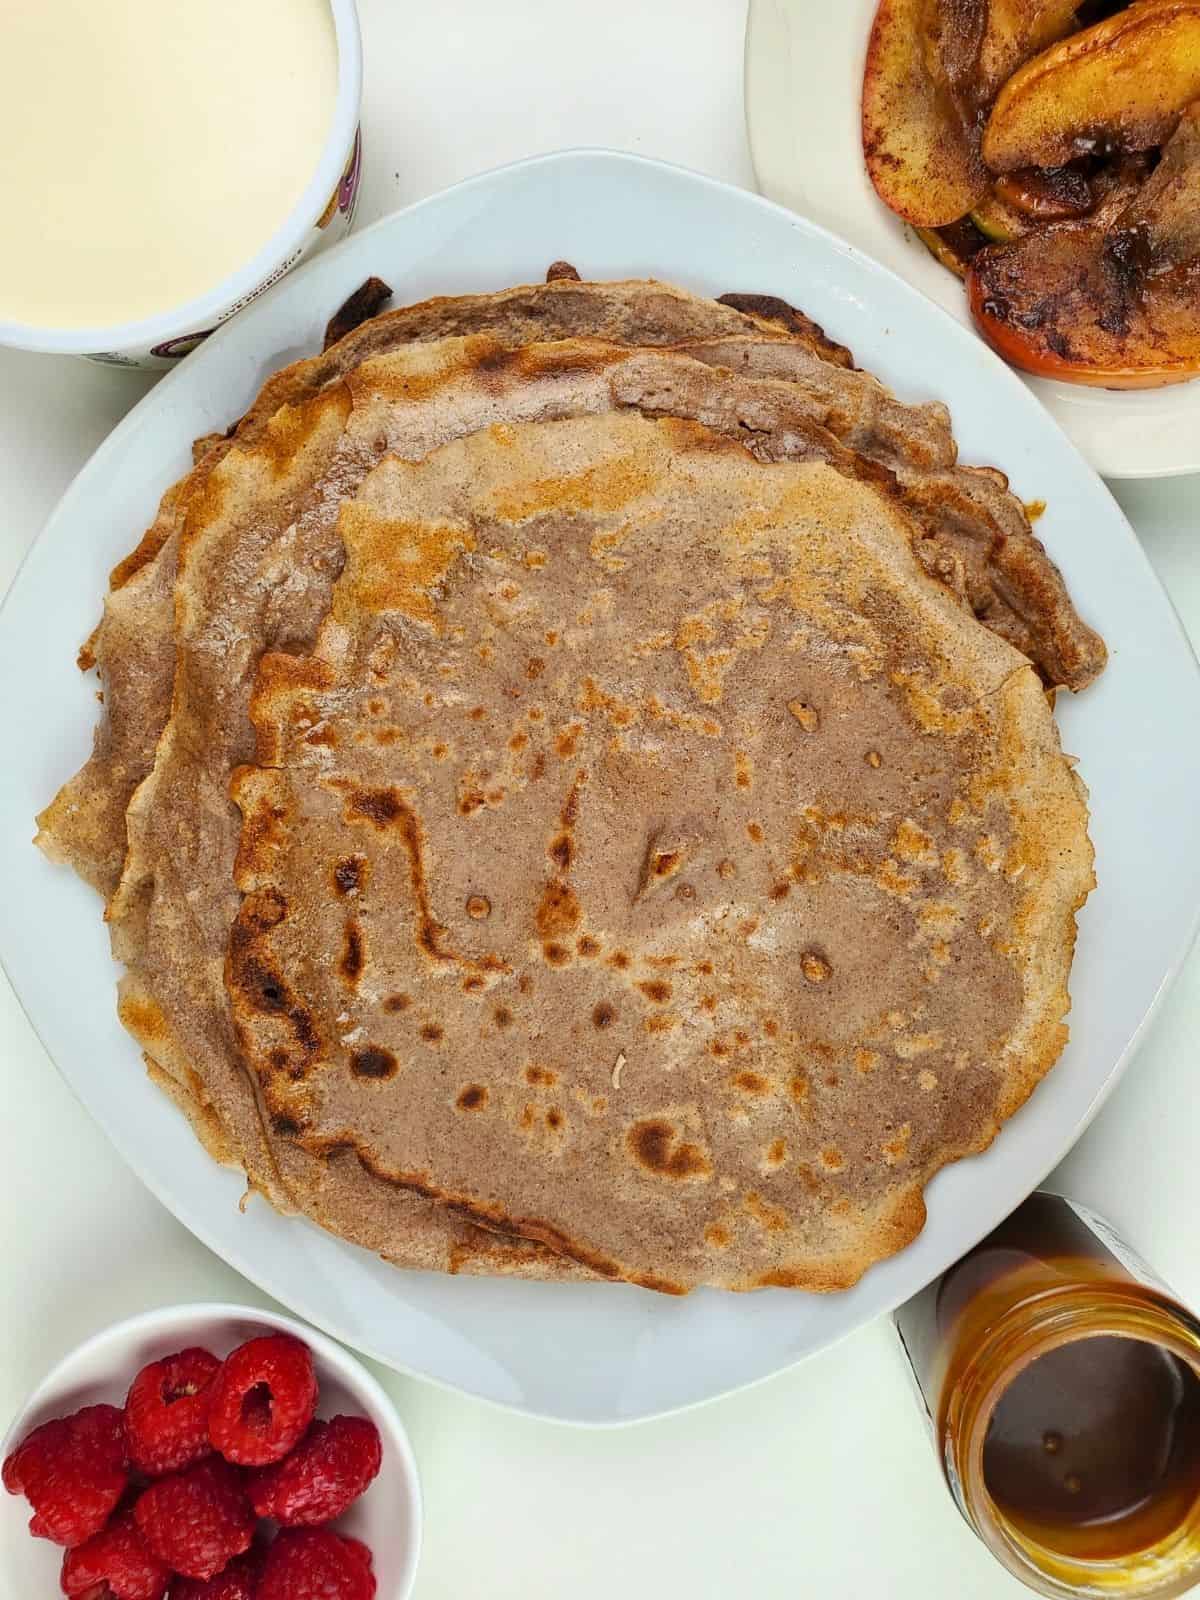 a well-cooked chestnut flour crepes on a plate, and various toppings and fillings to choose from.